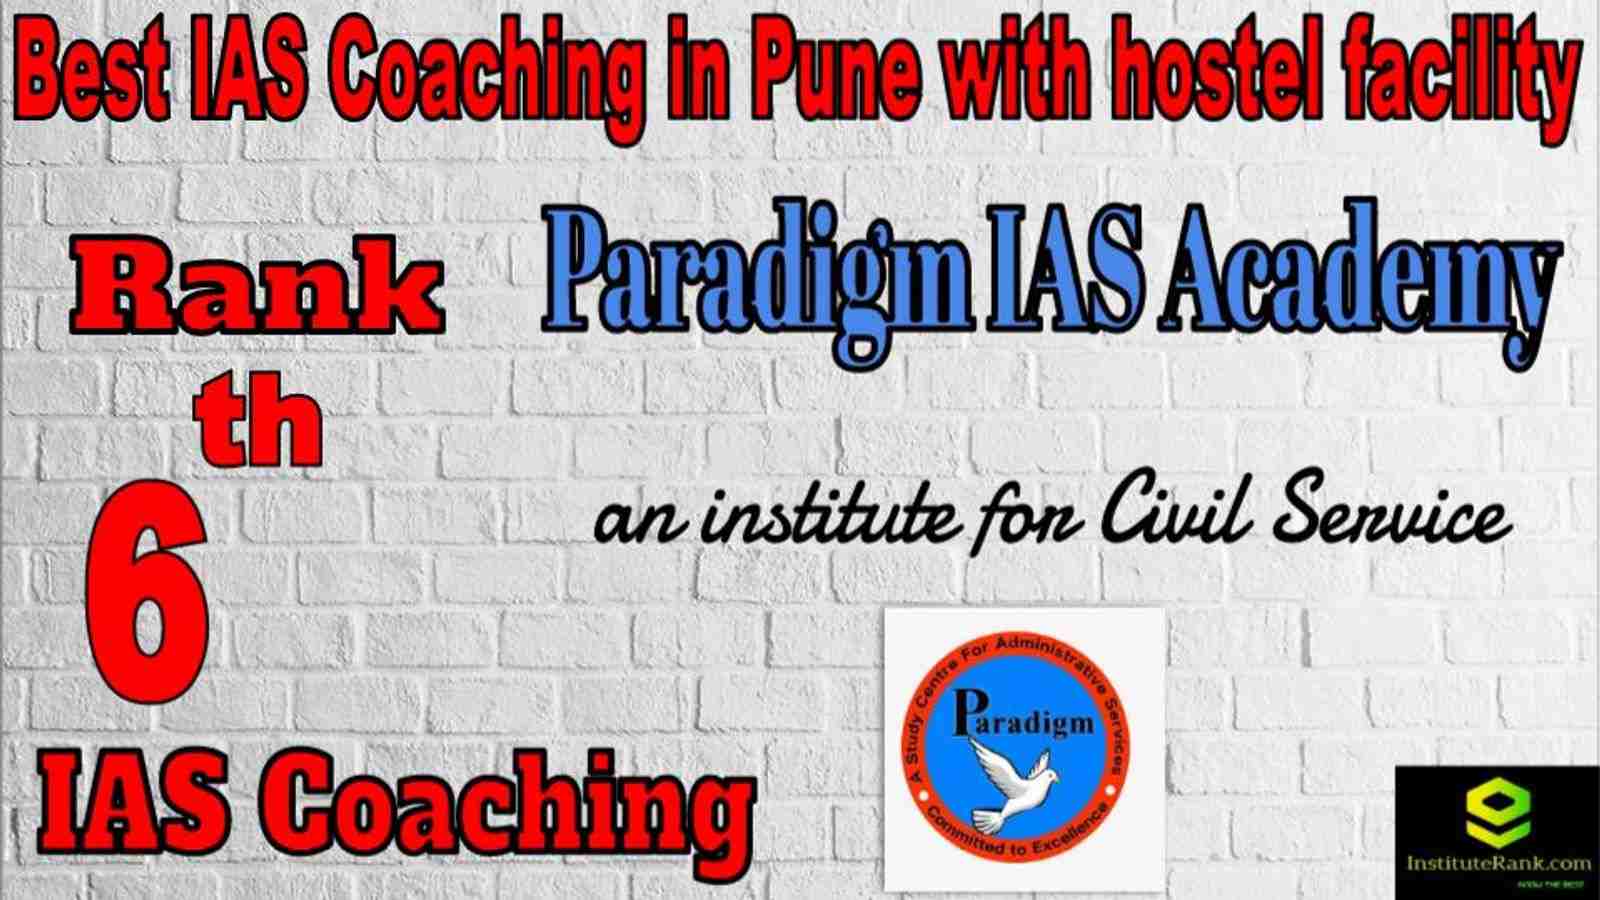 6th Best IAS Coaching in Pune with hostel facility